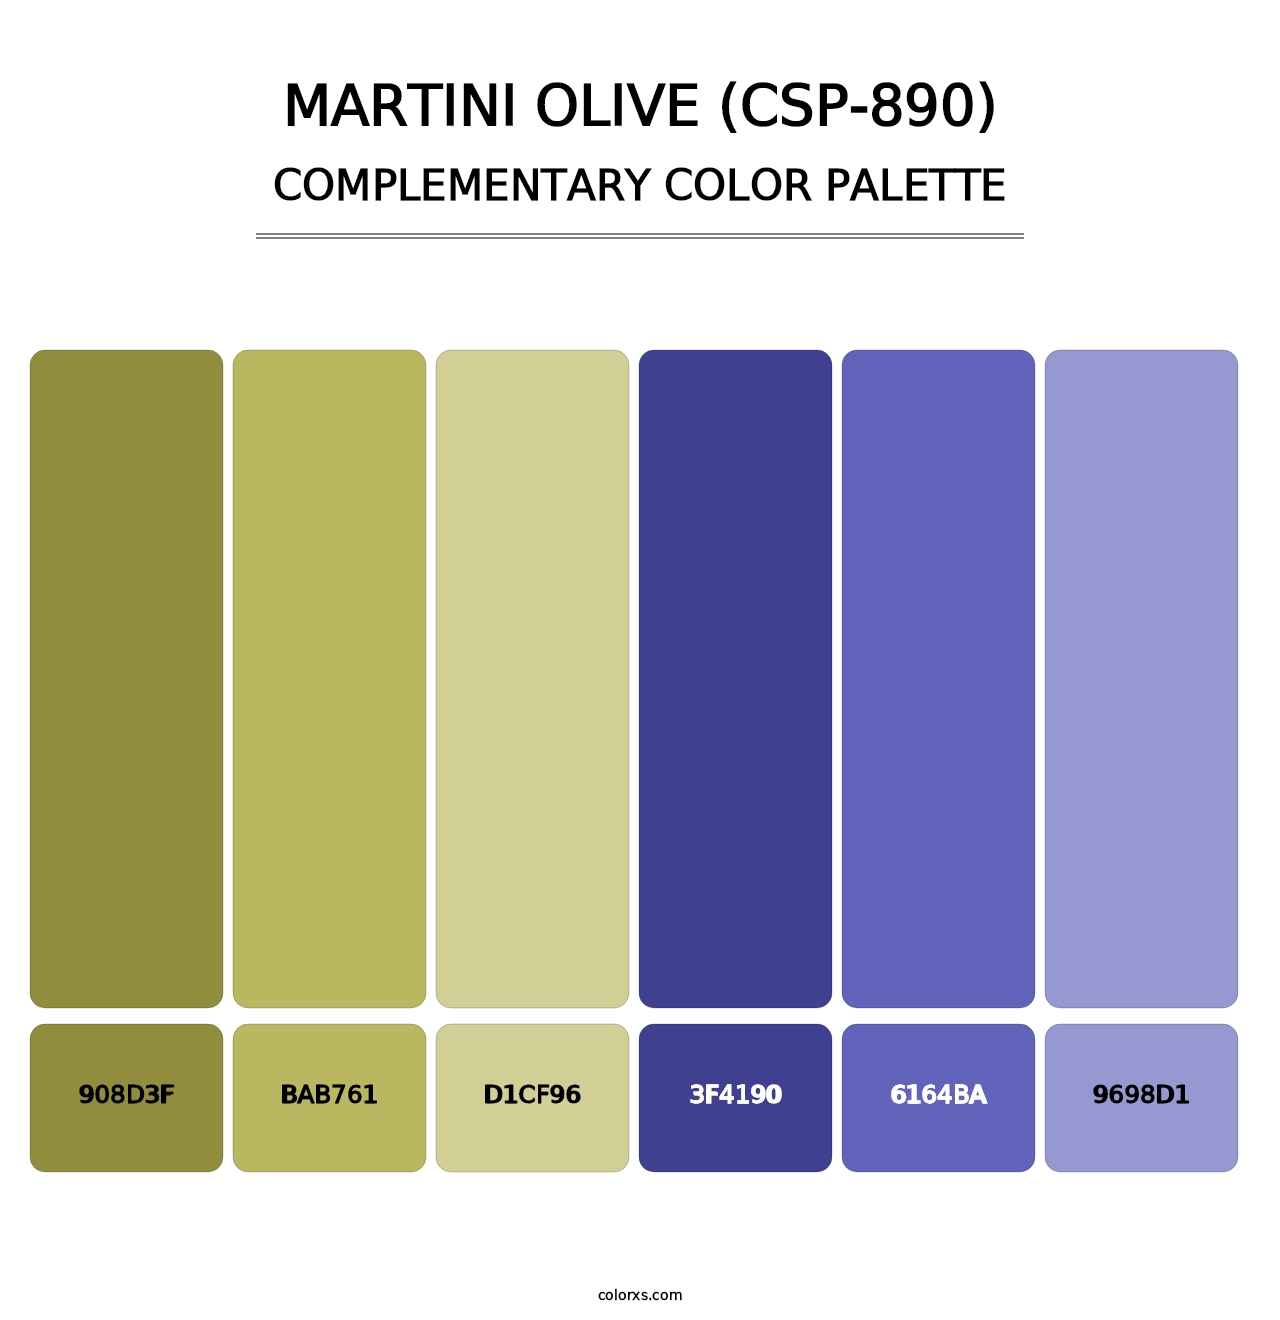 Martini Olive (CSP-890) - Complementary Color Palette